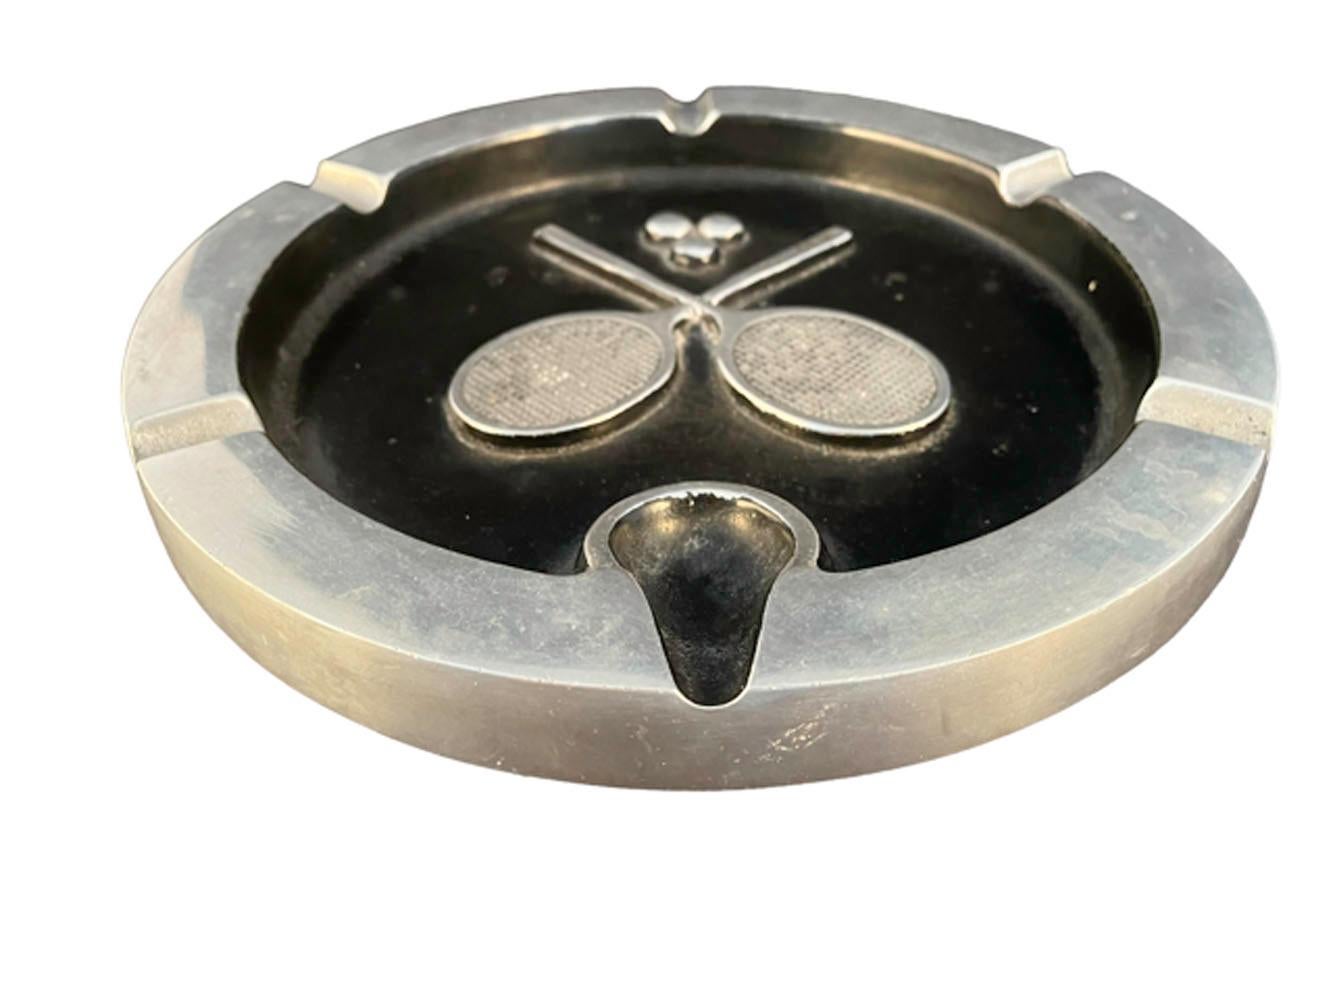 Cast aluminum ashtray of large proportions having raised crossed tennis rackets and balls in the center on a black enameled ground and raised rim with 5 divots for cigars/cigarettes as well as one pipe rest.